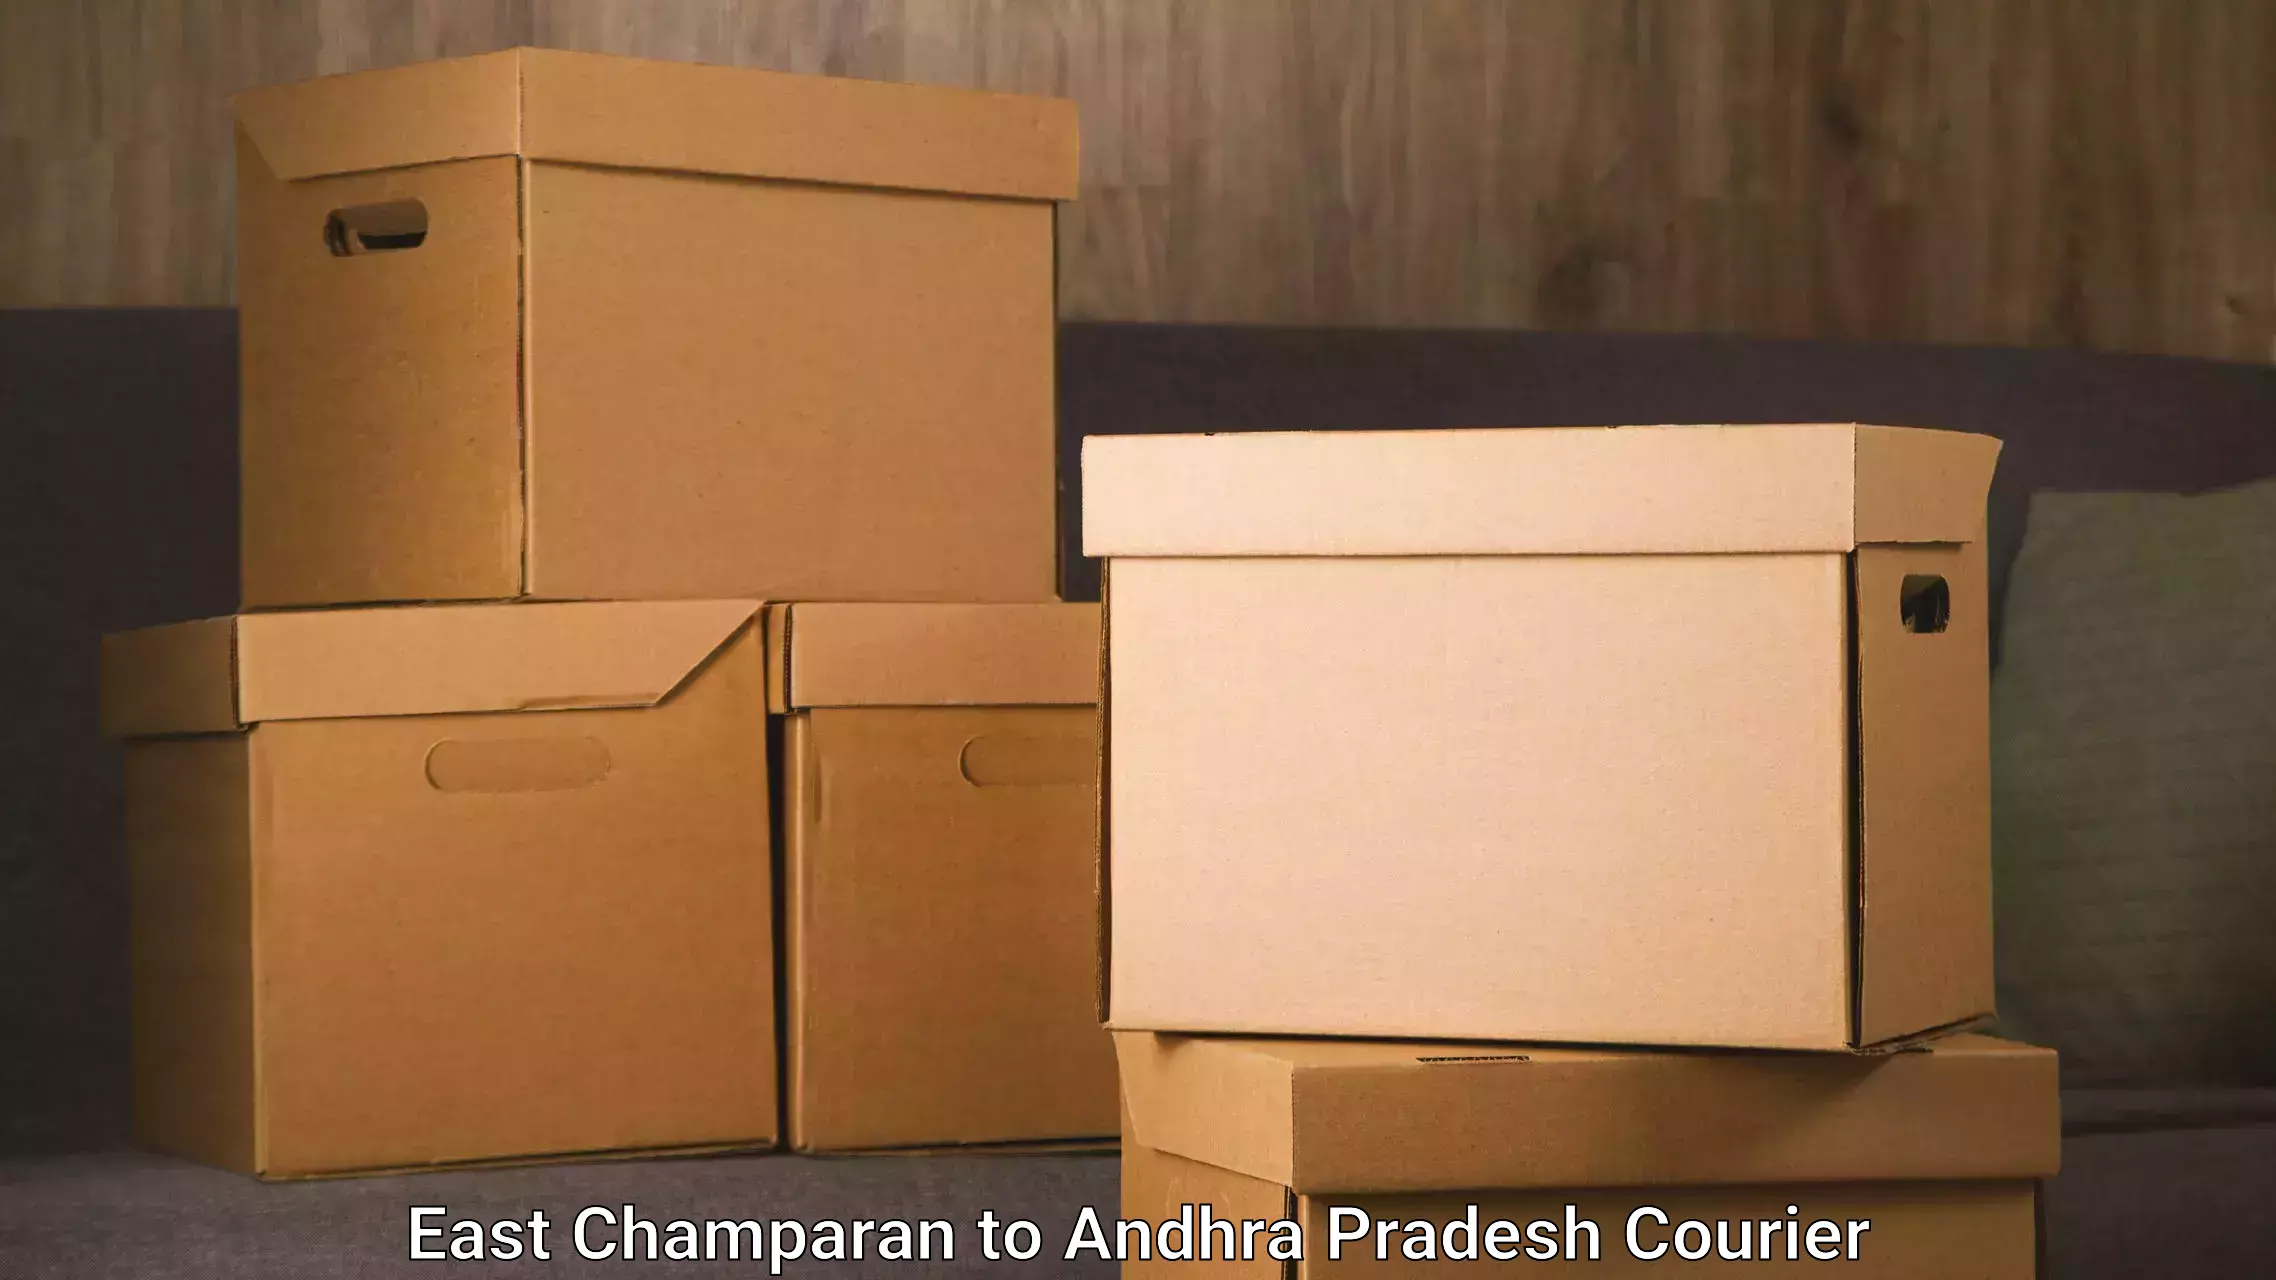 Household transport experts East Champaran to Andhra Pradesh